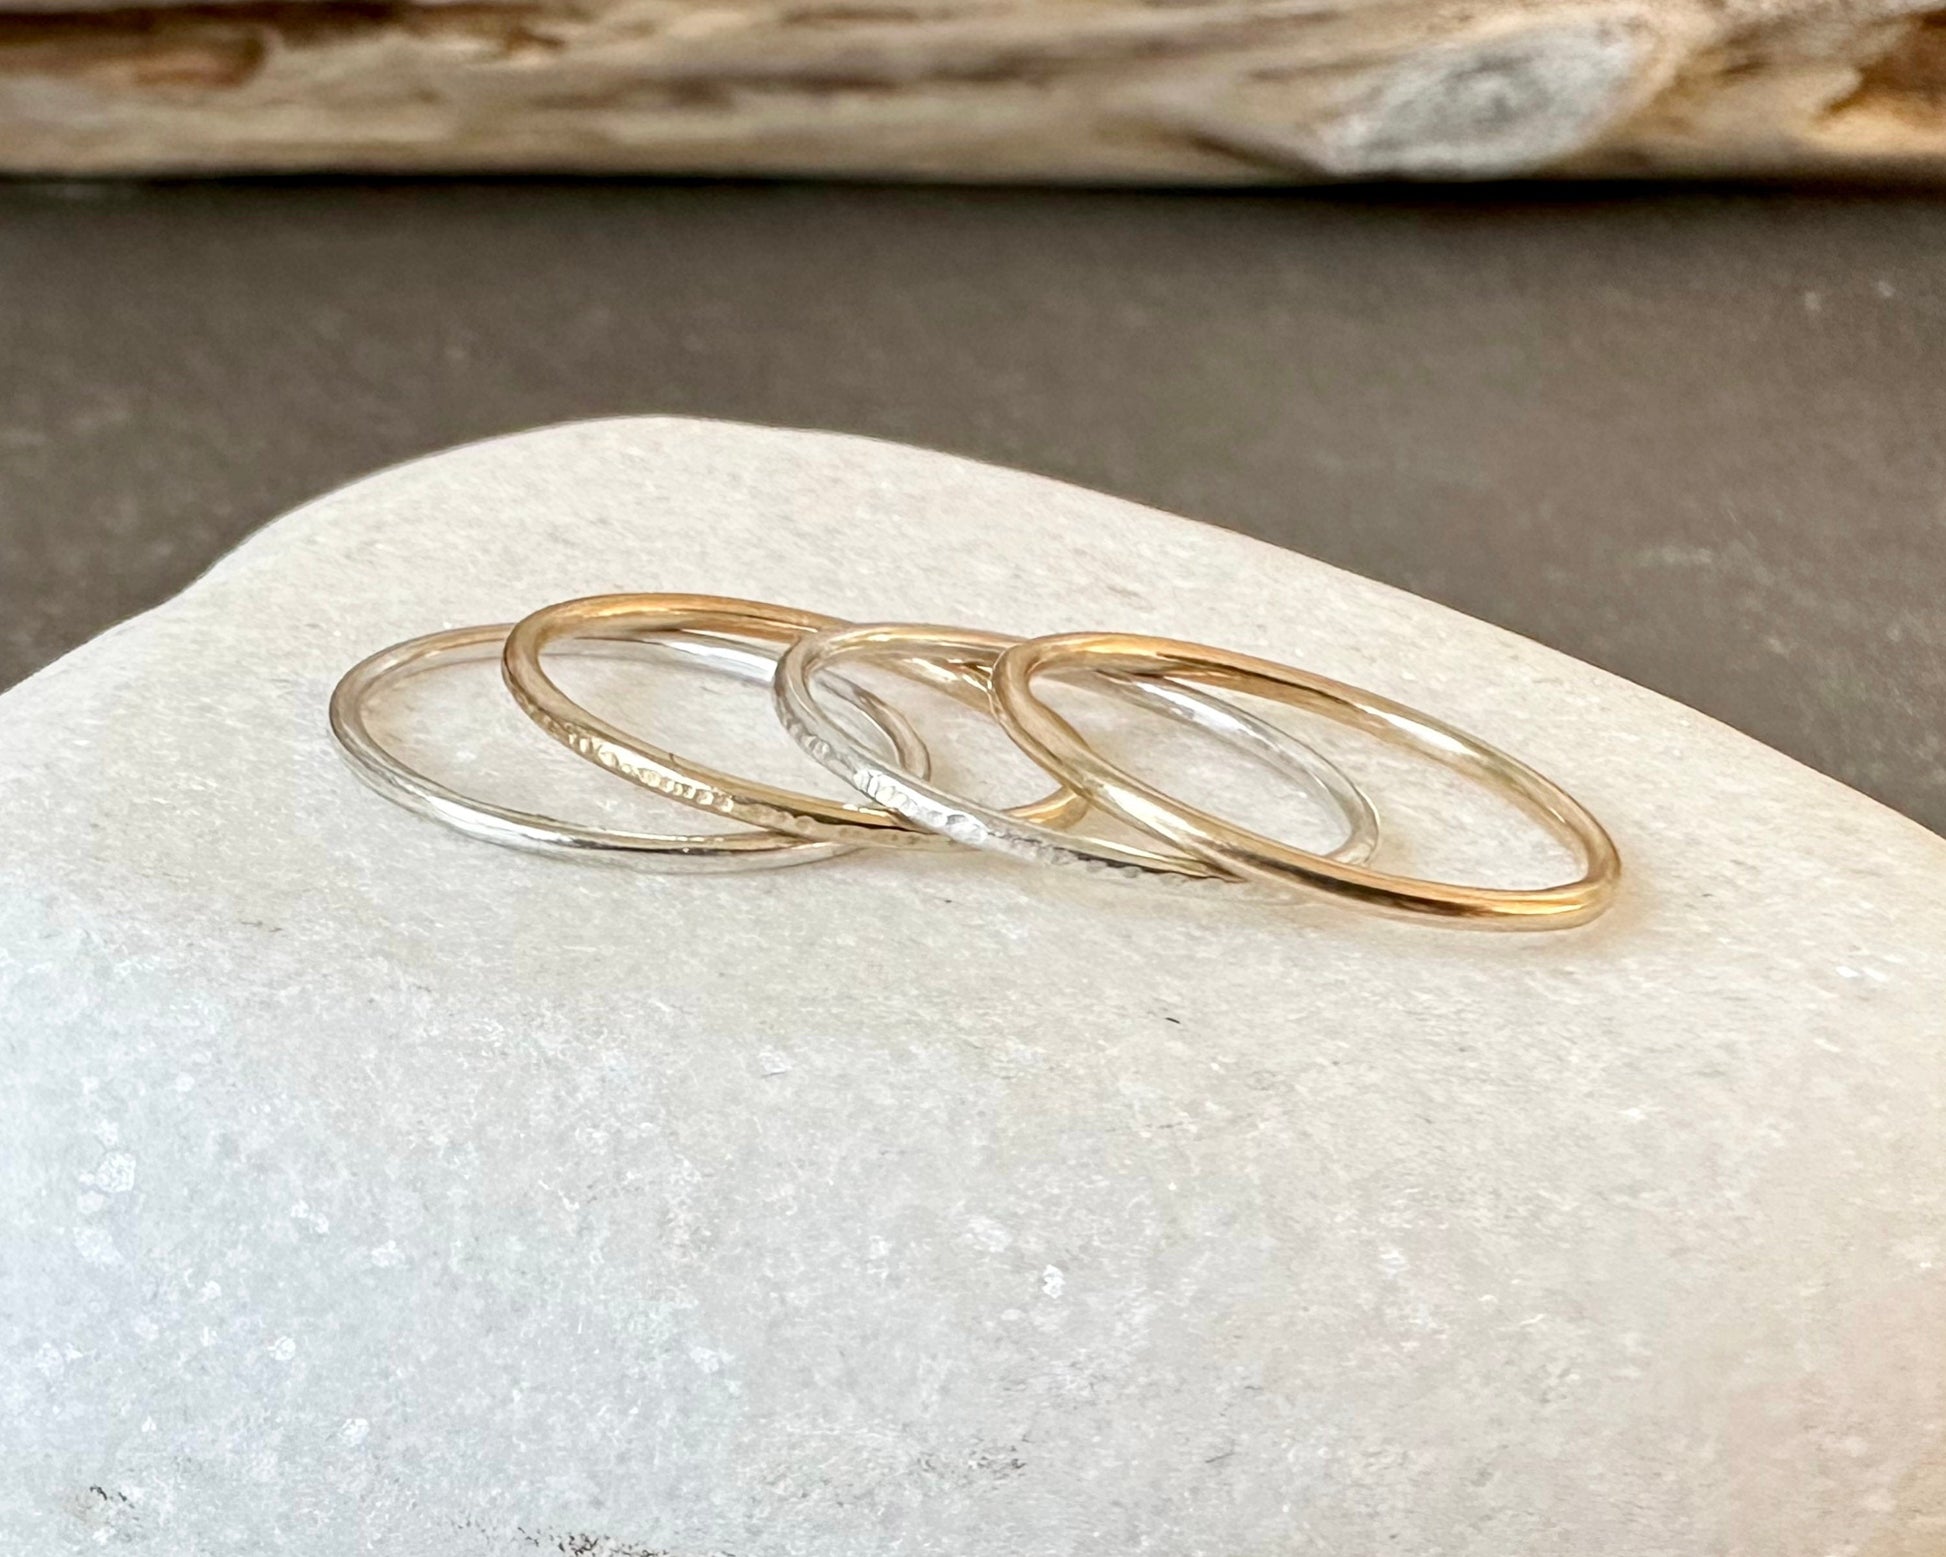 9ct Gold and 925 Sterling Silver Ring Set, 1.2mm Ring Bands Gold and Silver Ring Set of Four, Hammered Ring, Plain Ring, Thin Stacking Rings